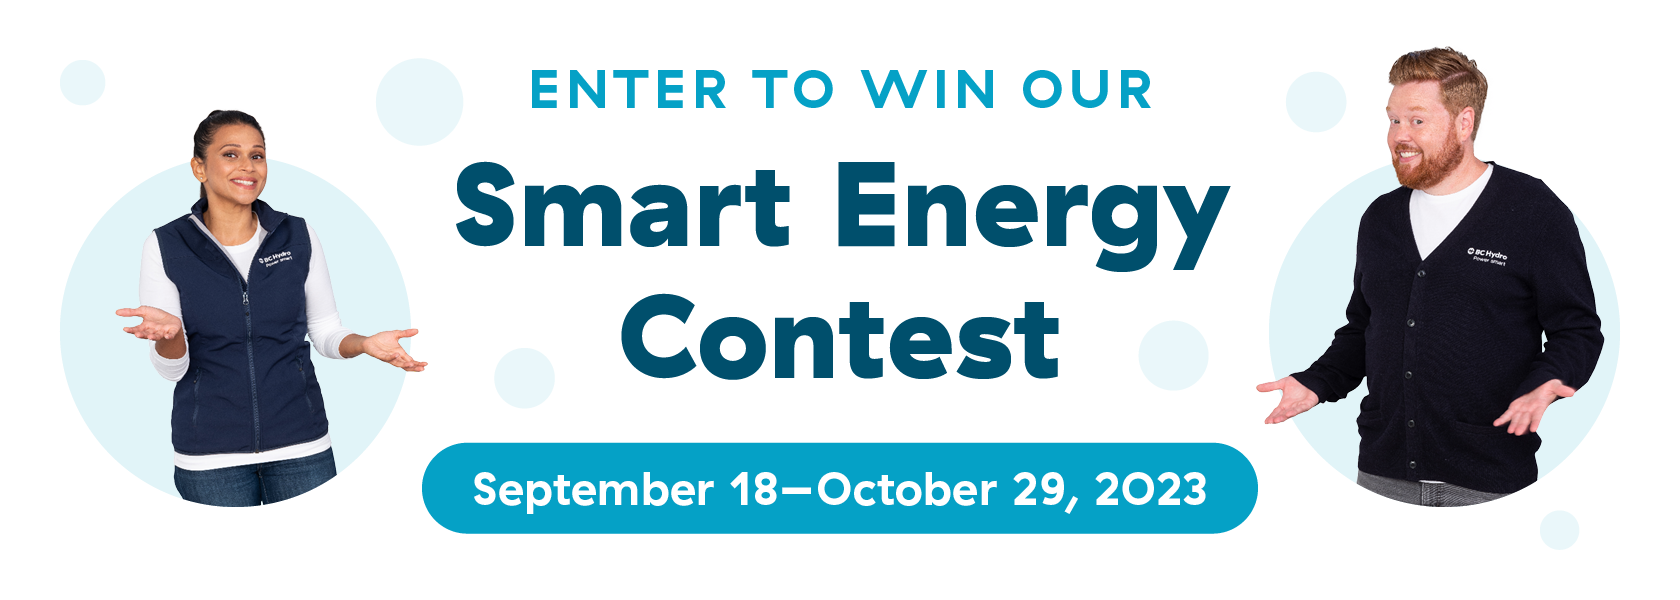 Smart energy contest (Fall campaign) September 18 to October 29, 2023